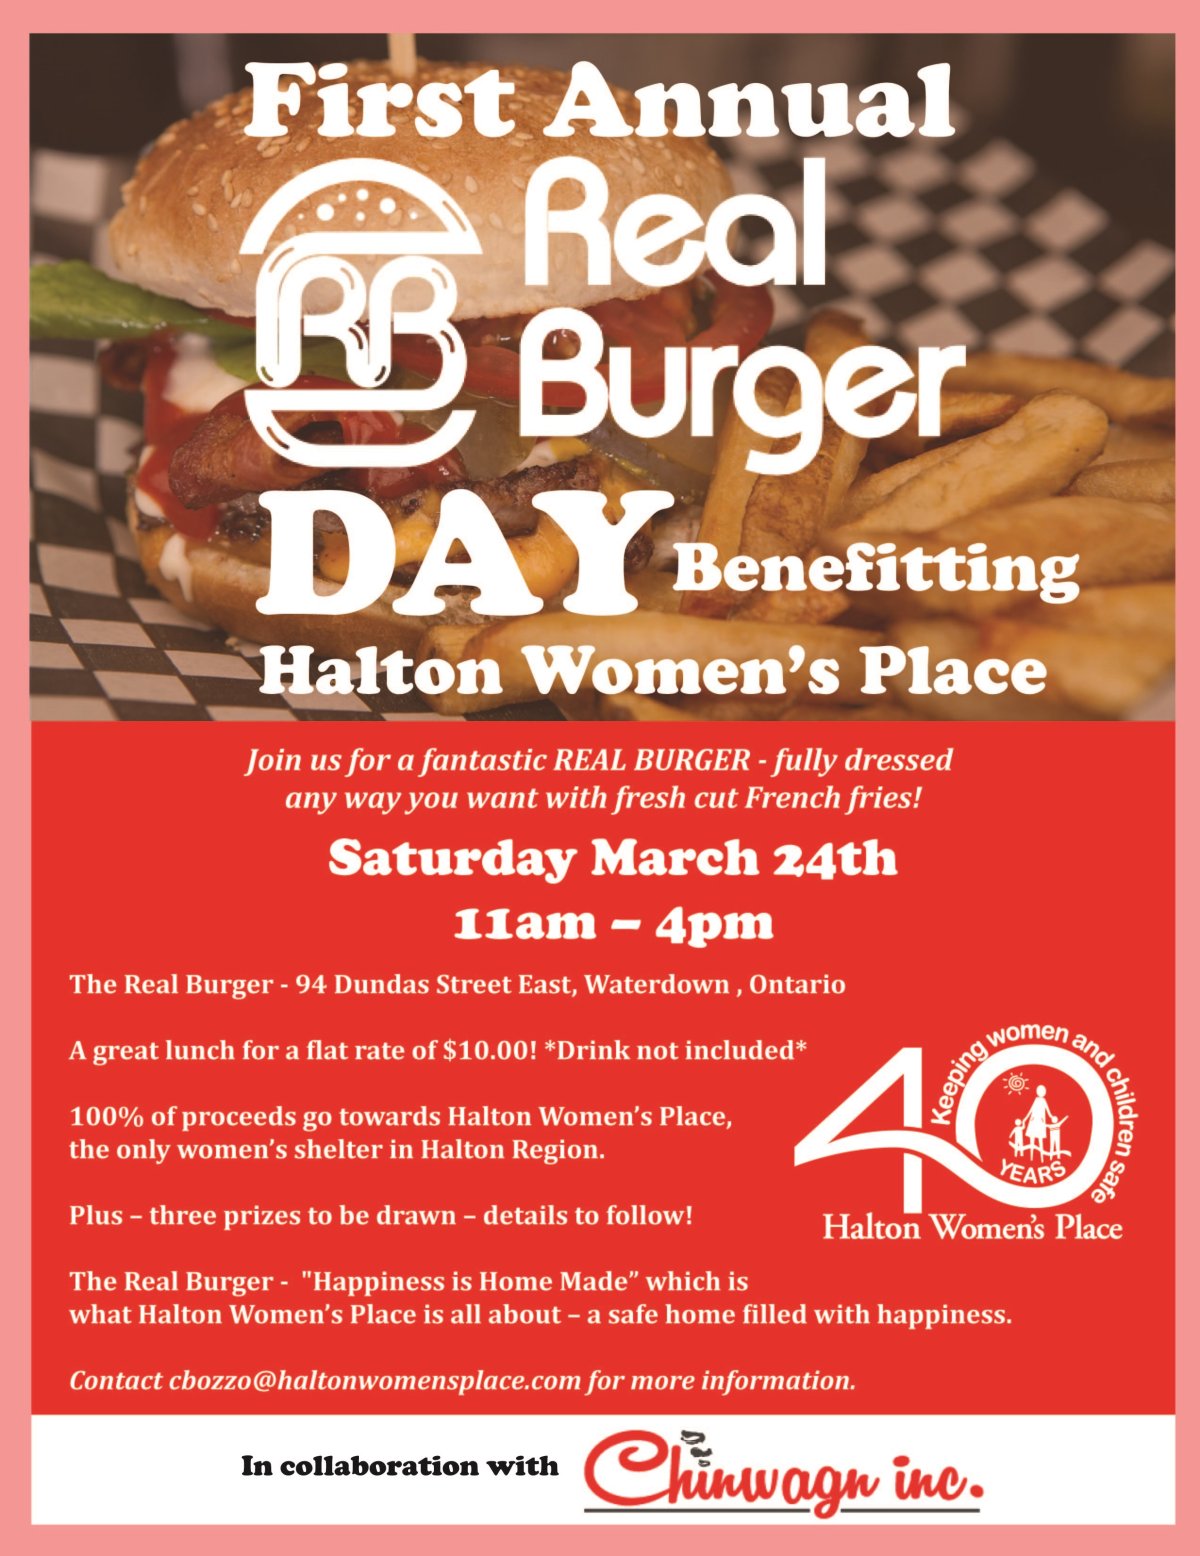 First Annual Real Burger Day - image